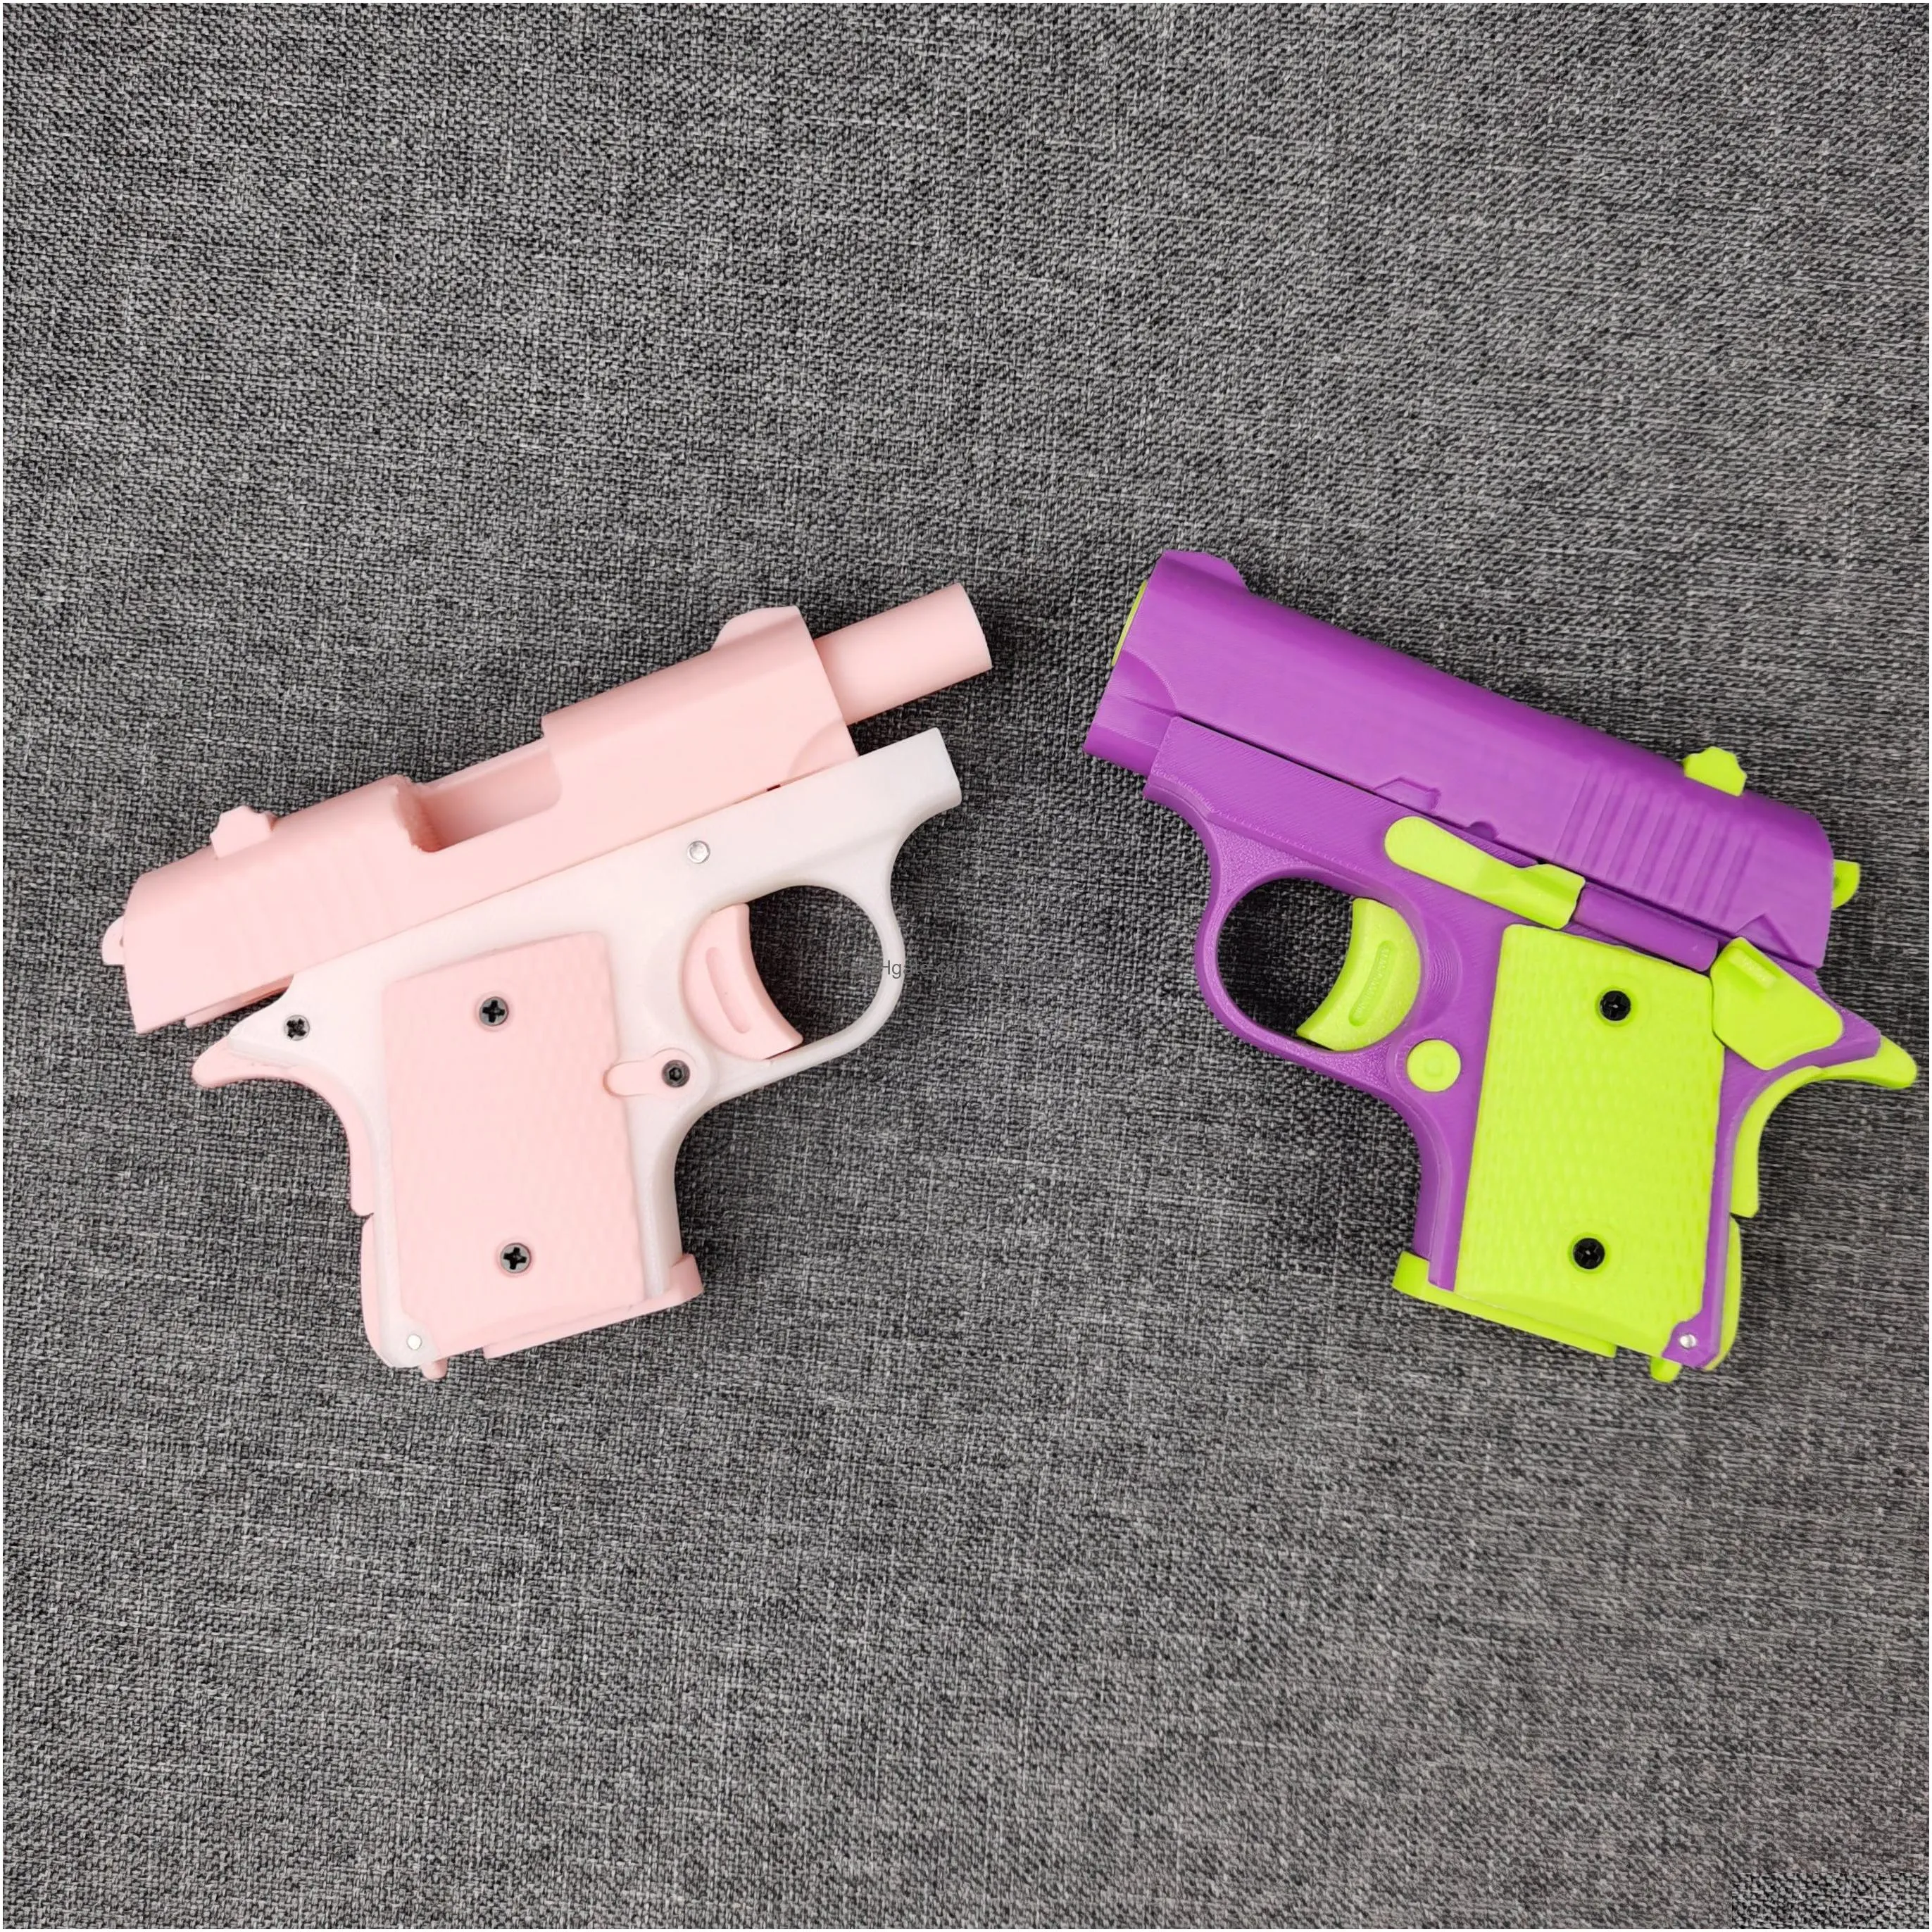 baby 1911 edc toy gun for kids adults boys birthday gifts